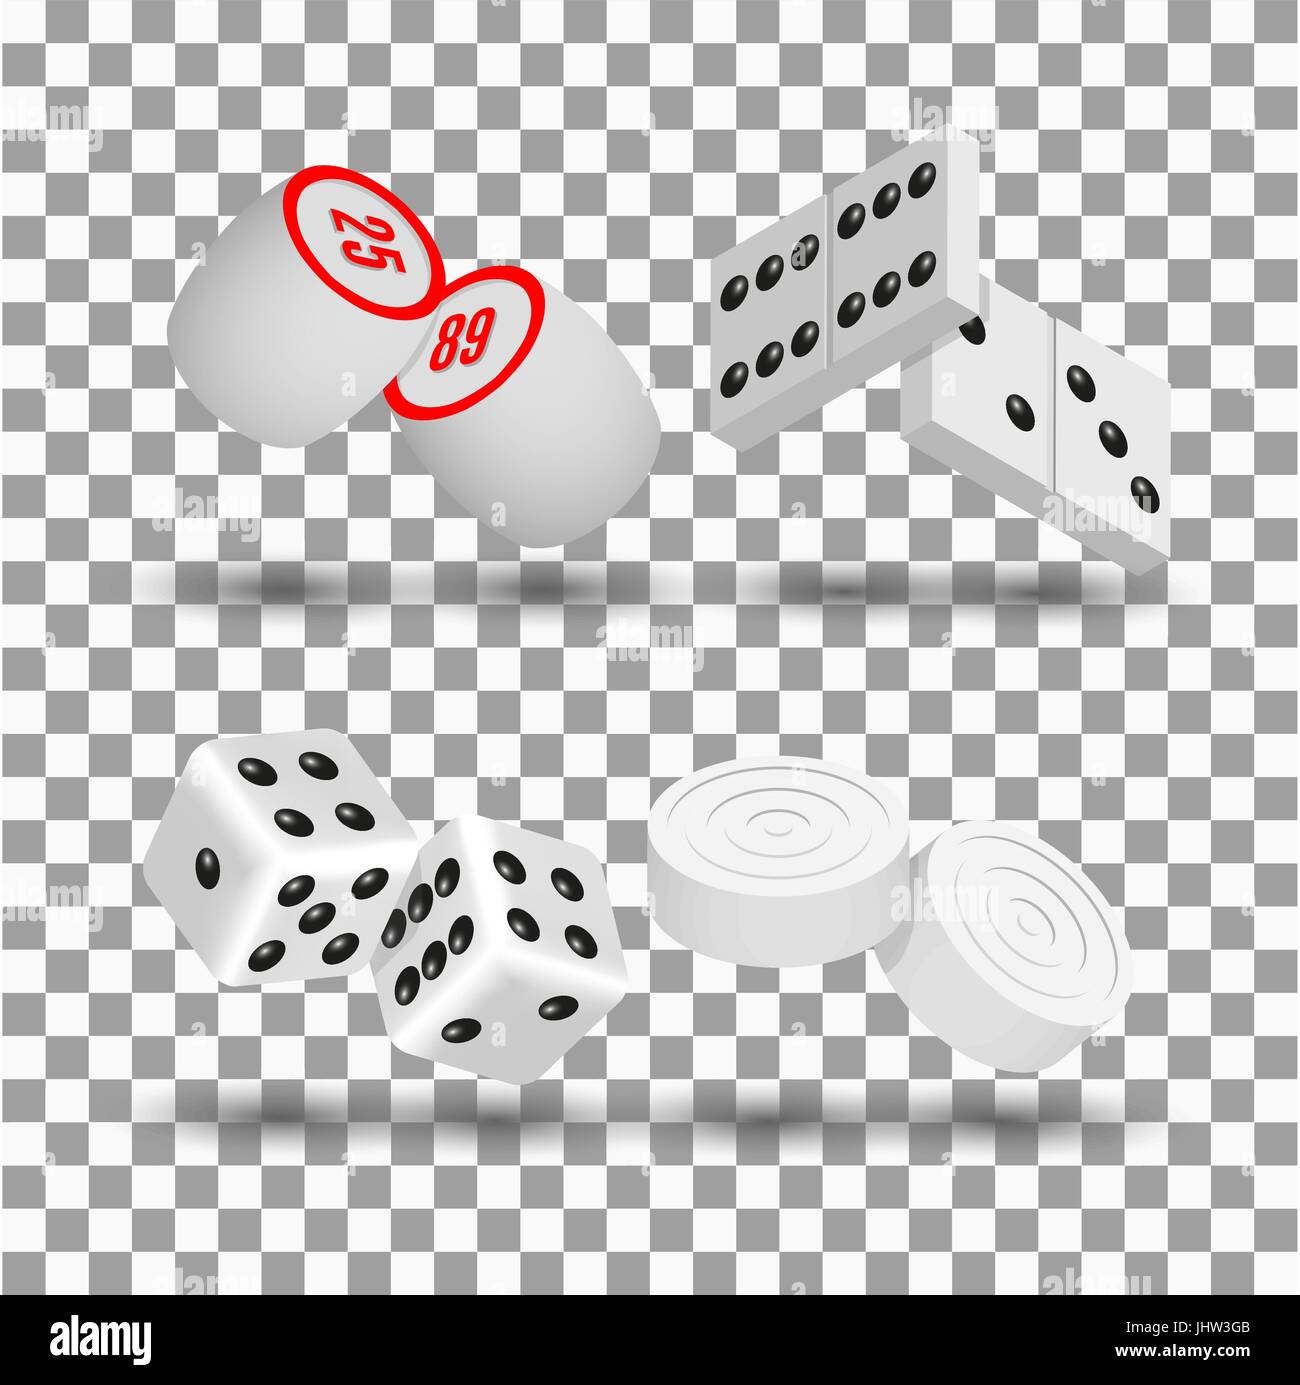 Realistic 3D game icons. Items to play dominoes, dice, checkers and lotto, vector illustration. Stock Vector